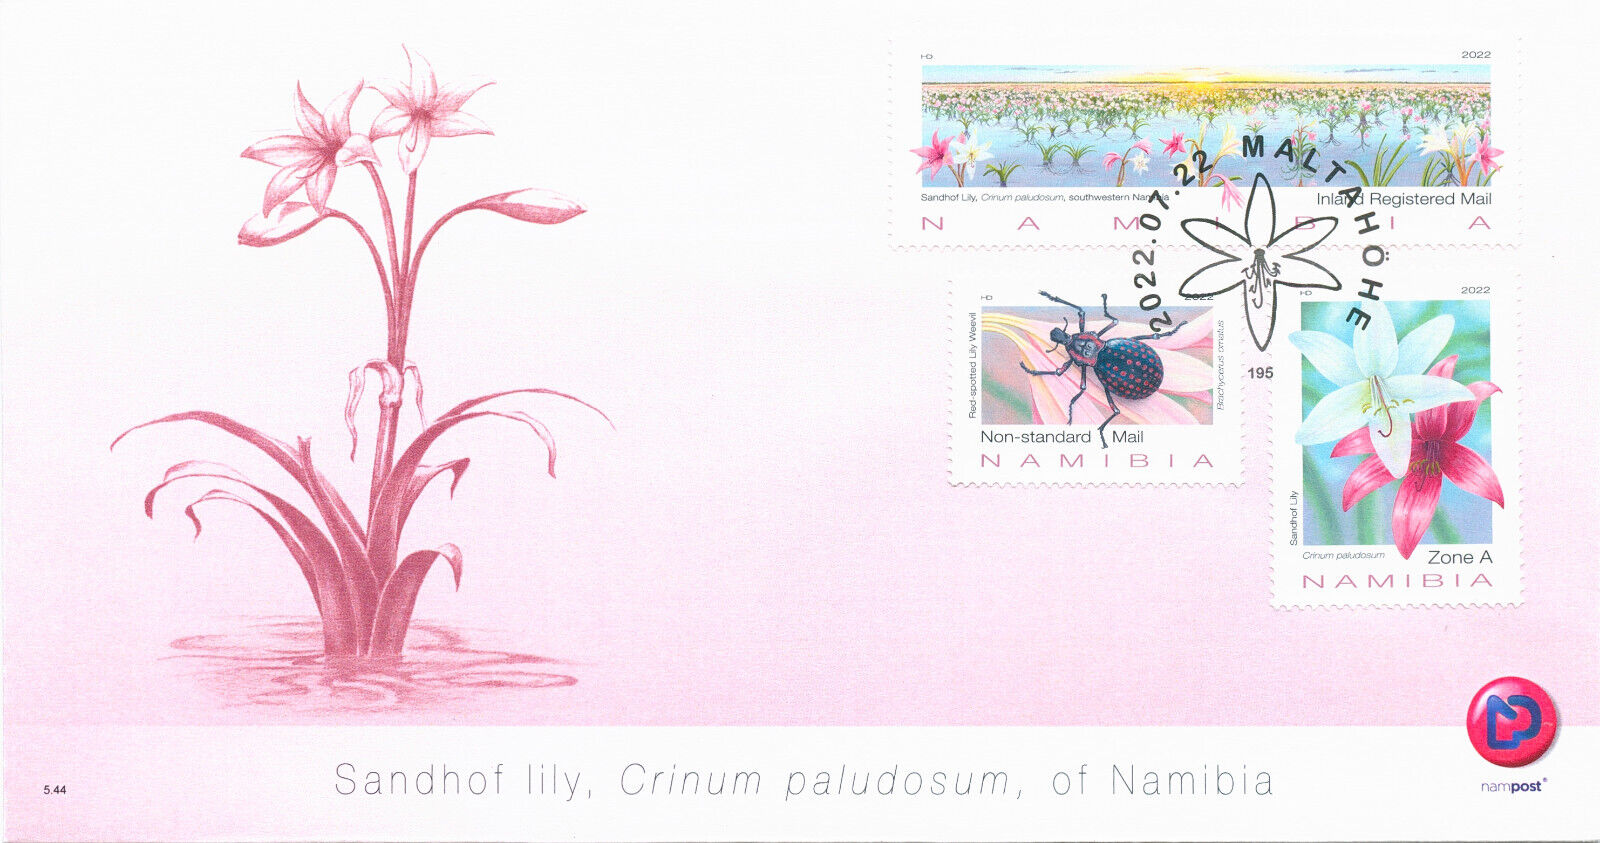 Namibia 2022 FDC Flowers Stamps Sandhof Lily Lilies Beetles Flora Nature 3v Set